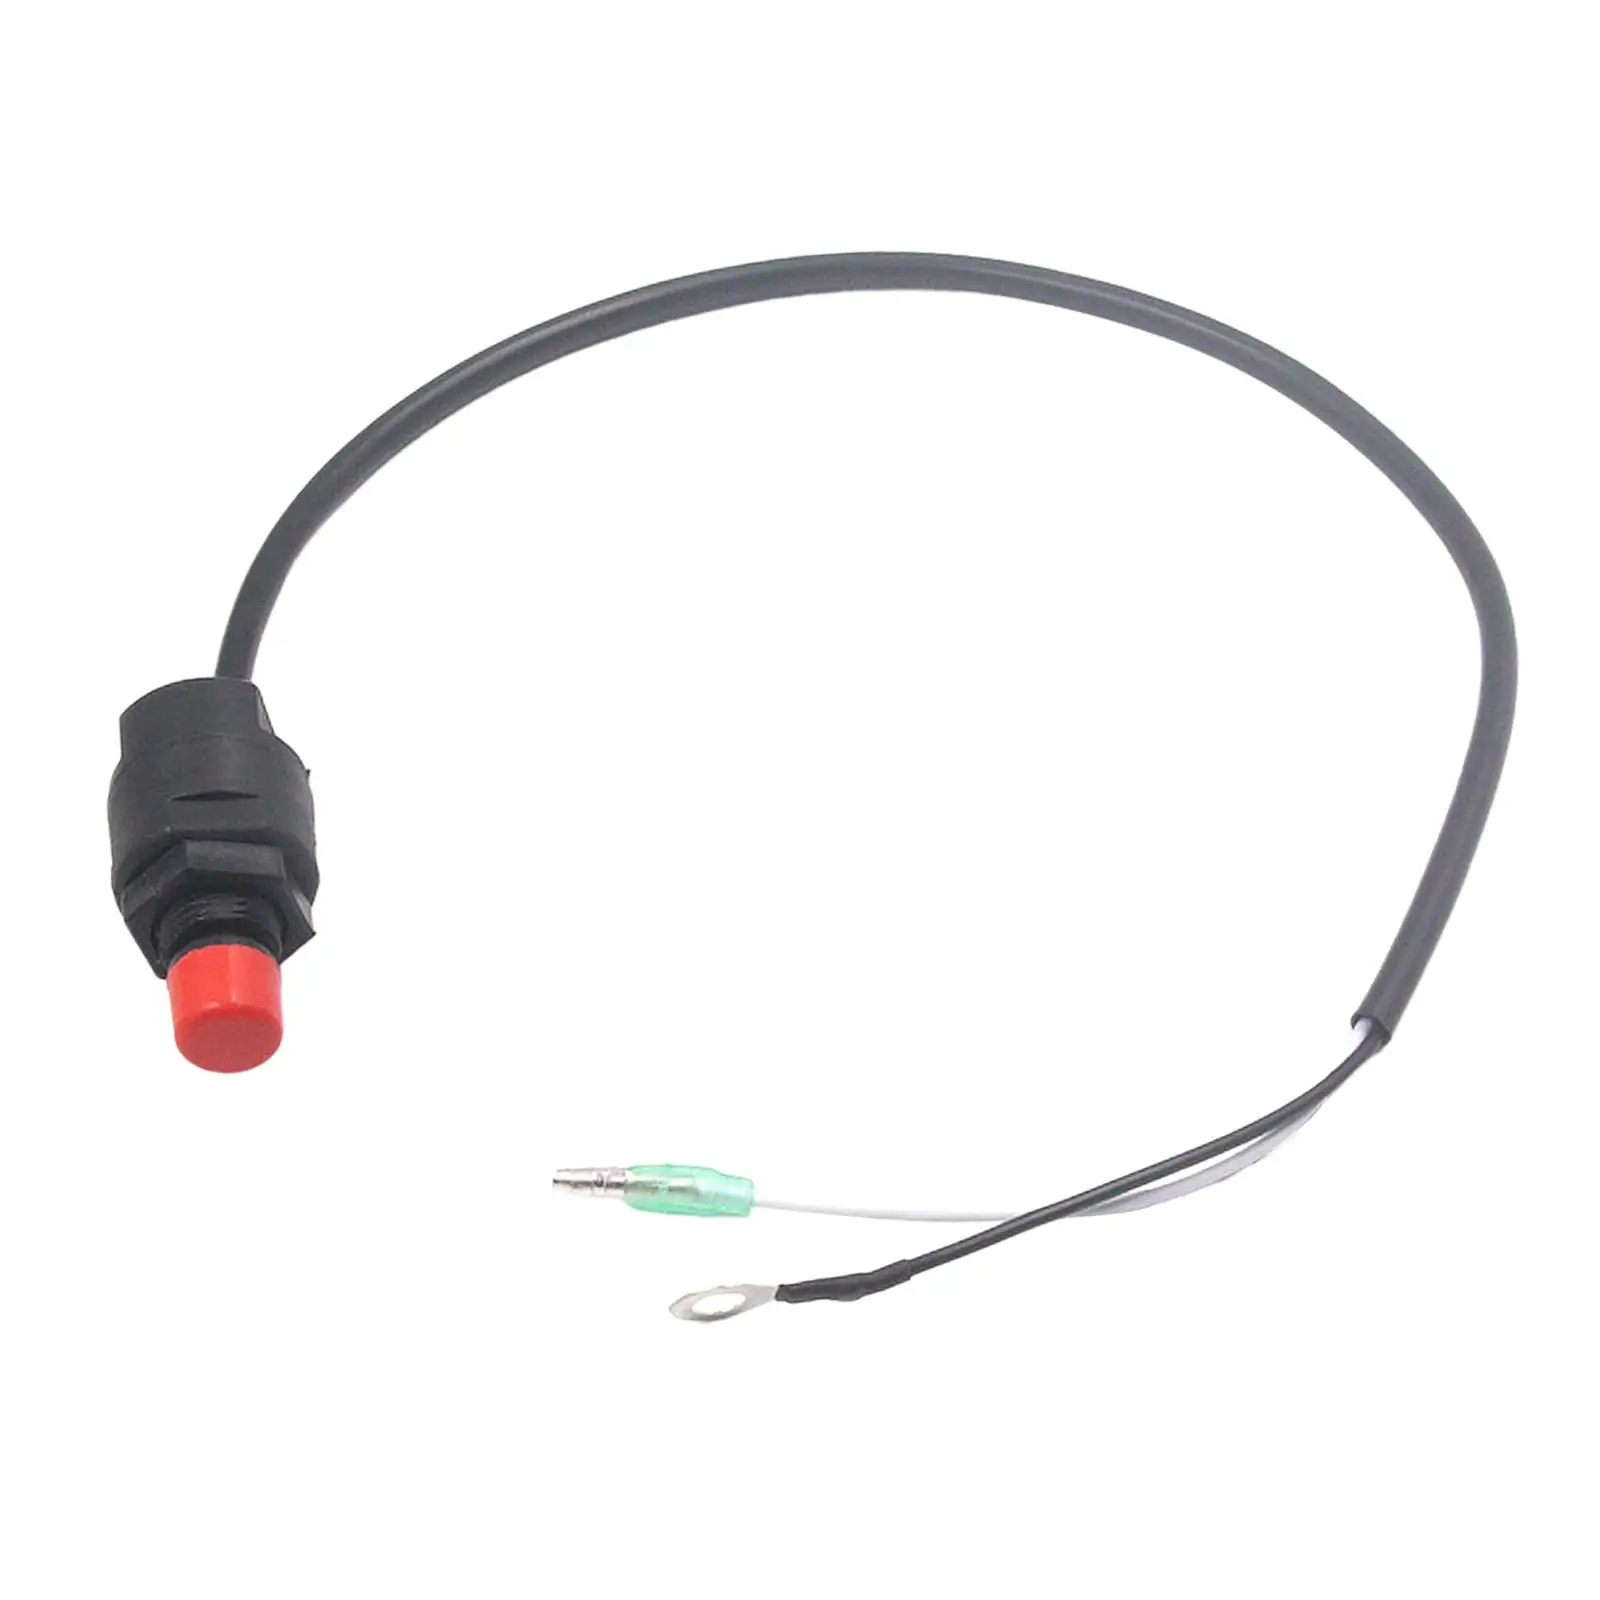 Boat Kill Switch Replaces Engine Motor Emergency Kill Stop Switch for